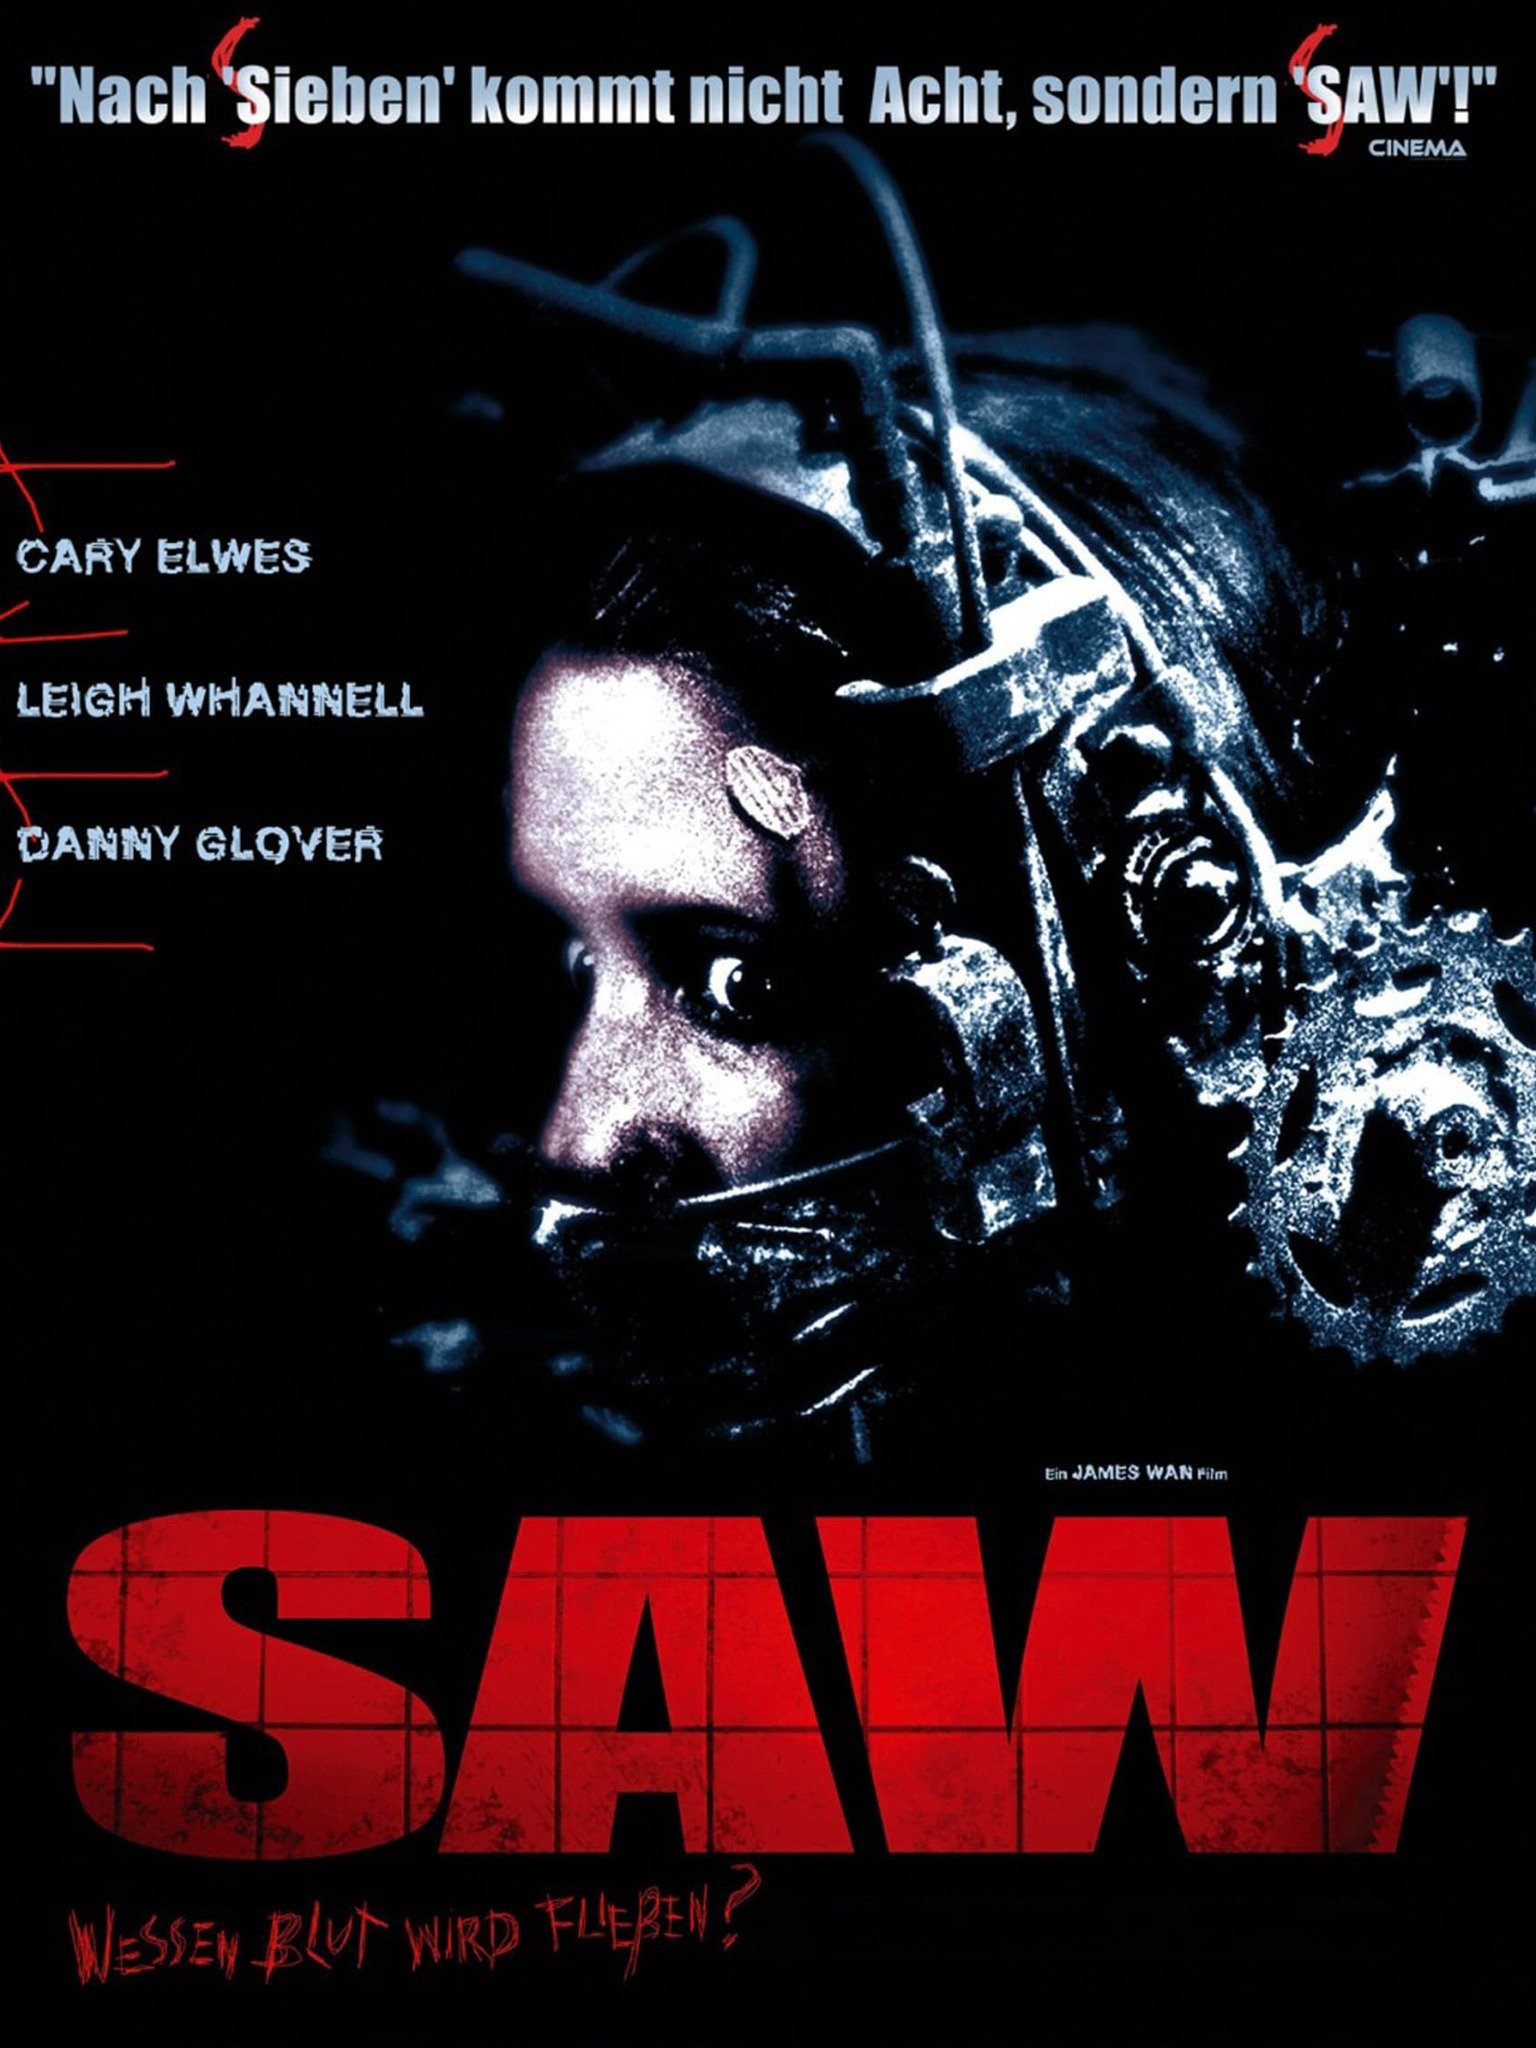 Things get personal for Jigsaw in the official trailer for Saw X